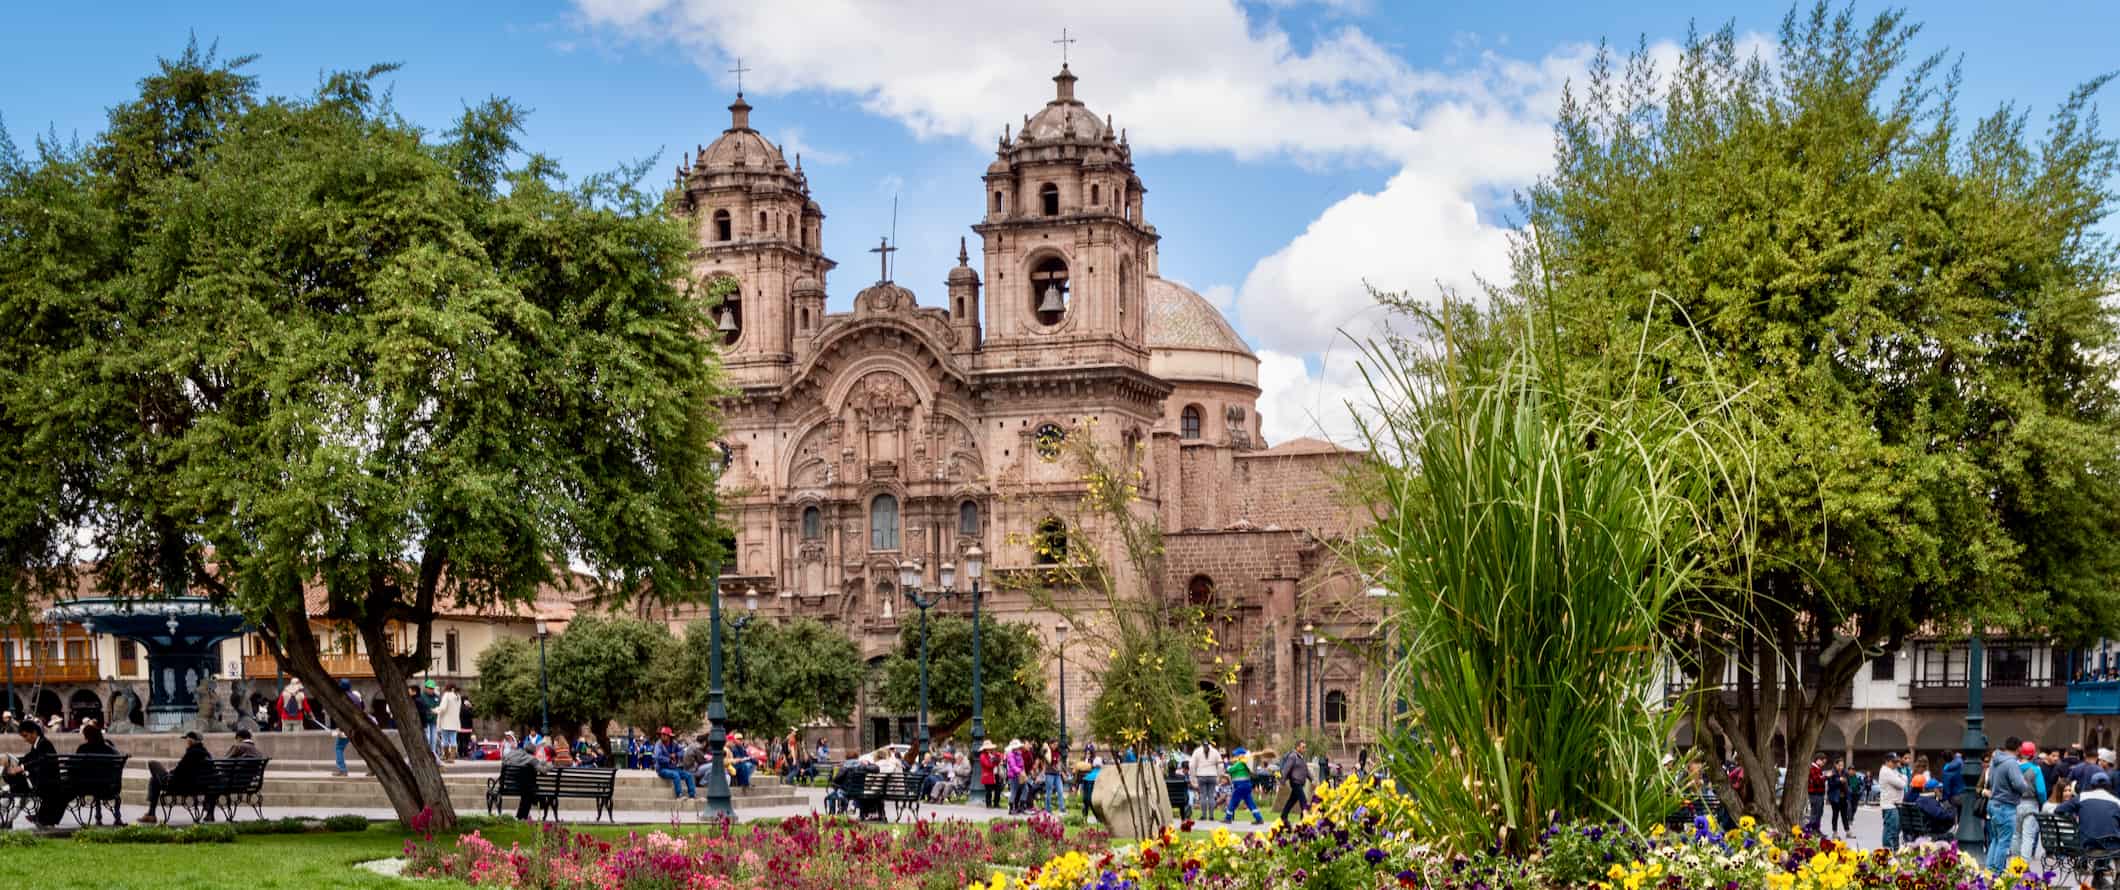 The historic square of Cusco, Pero full of flowers and travelers exploring the city